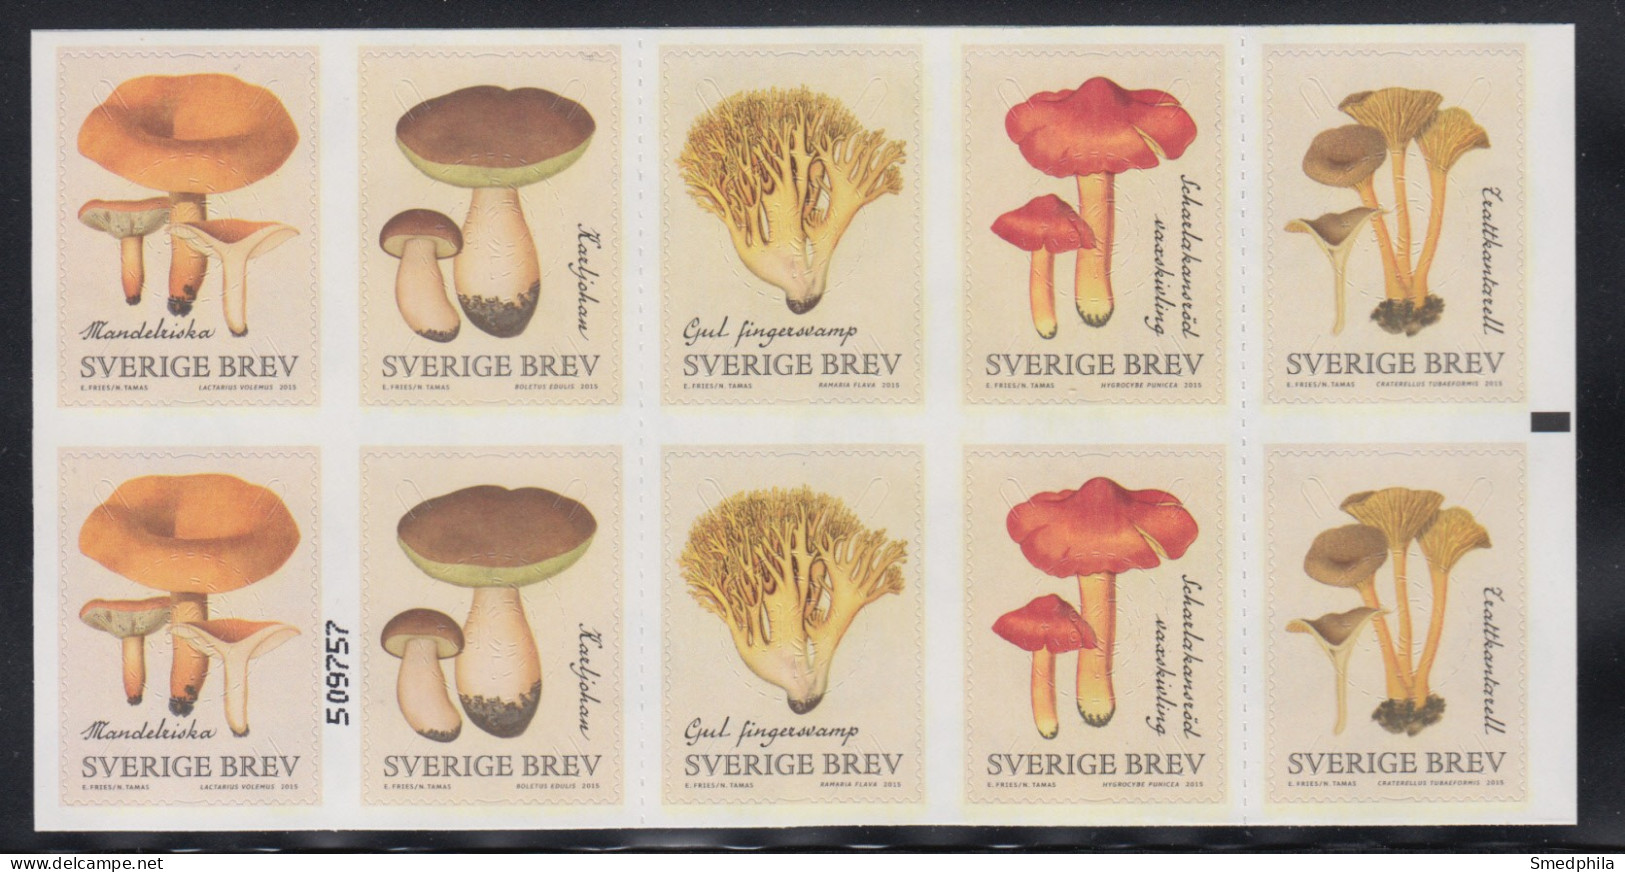 Sweden Booklet 2015 - SH 84 MNH ** Self-Adhesive - 1981-..